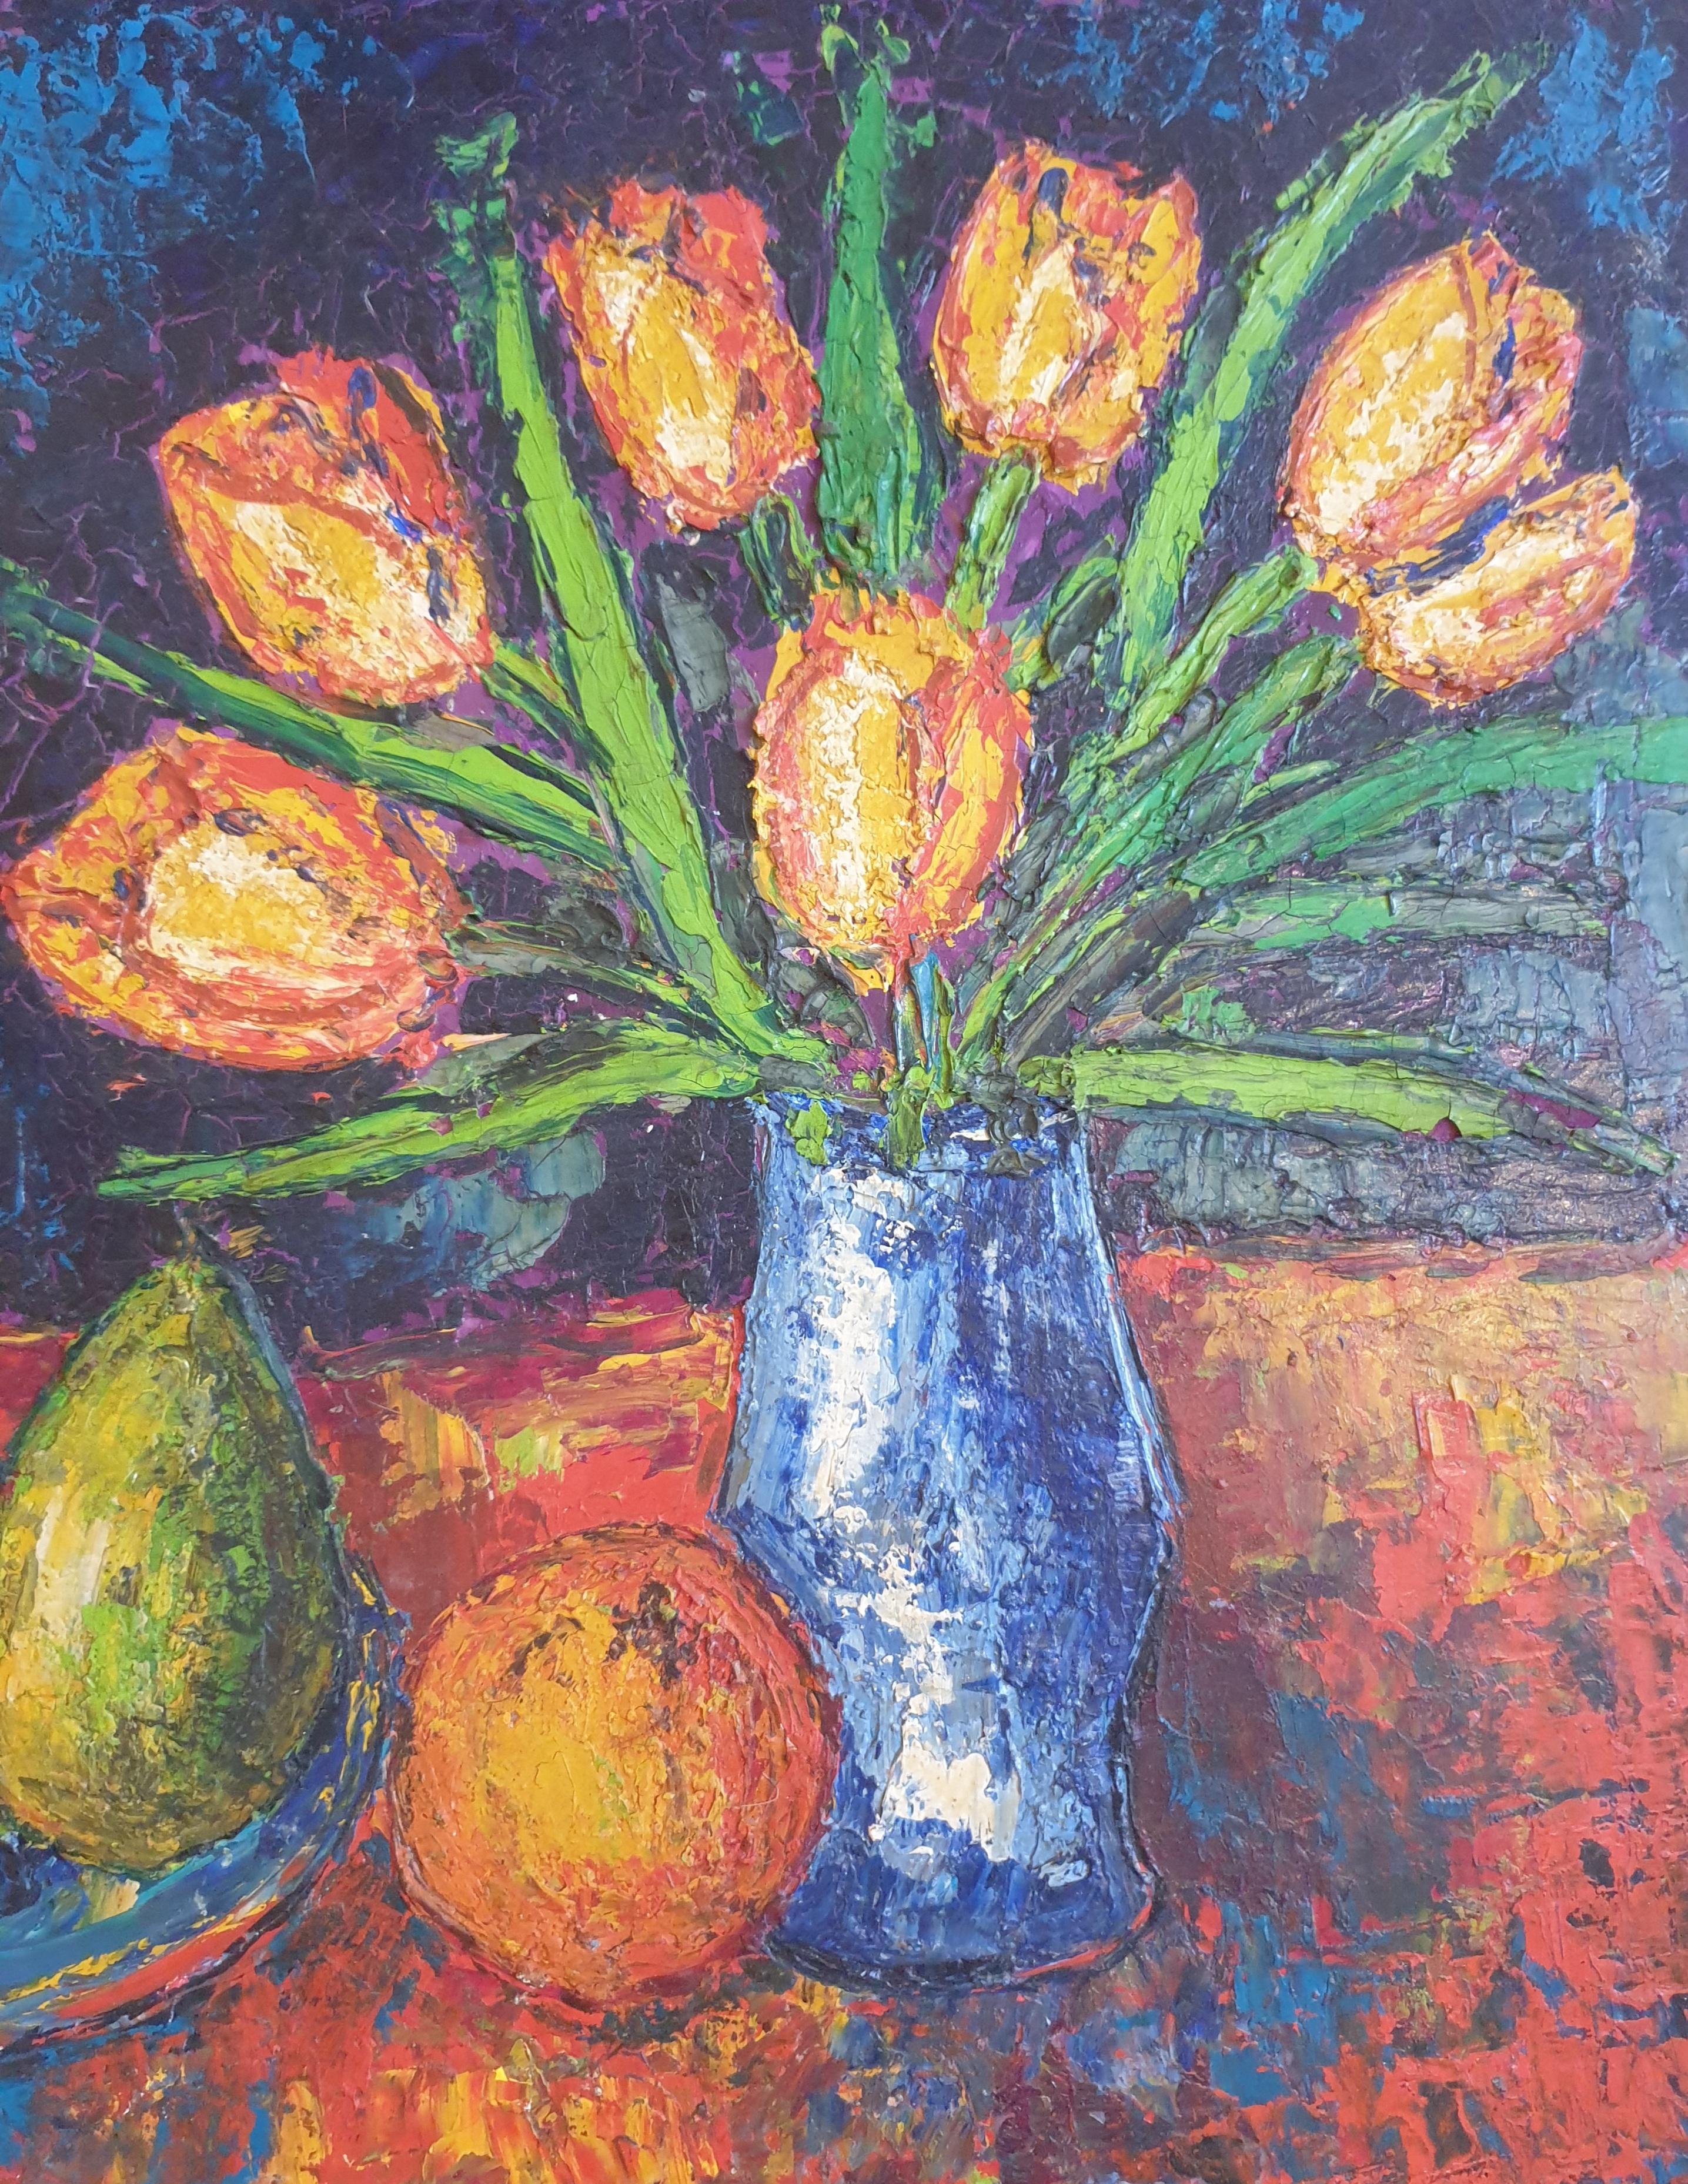 colourful still life painting